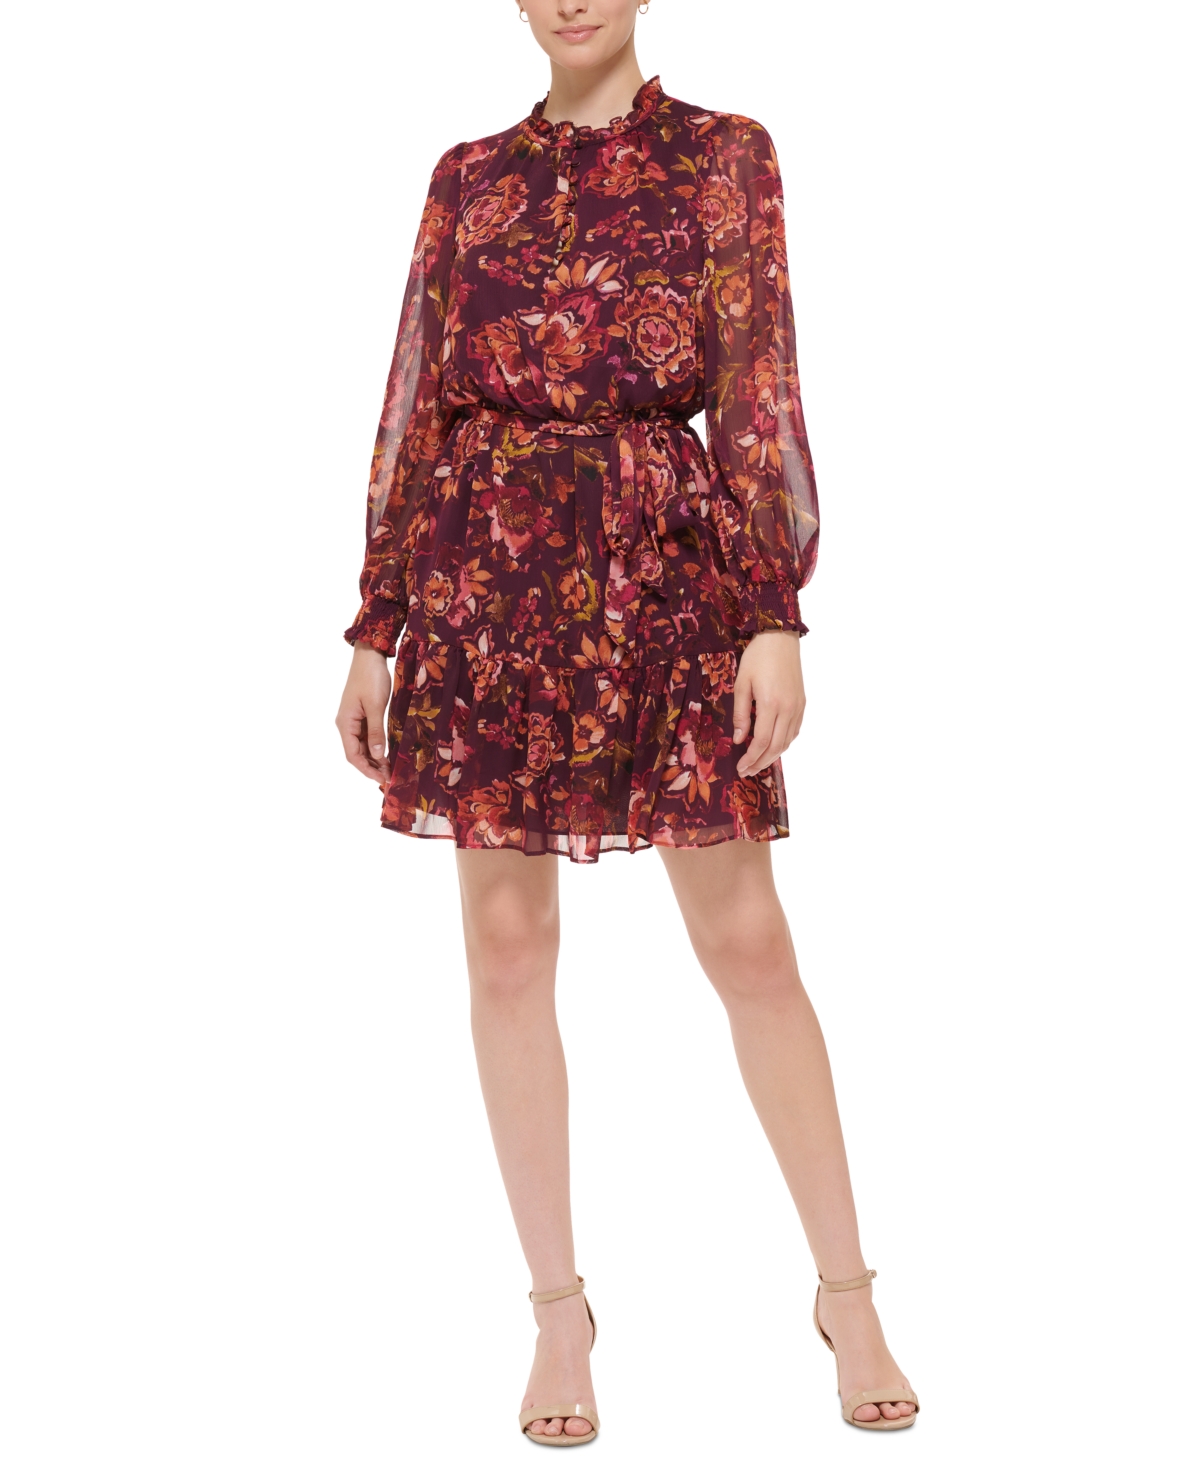 Vince Camuto Women's Printed Fit & Flare Dress